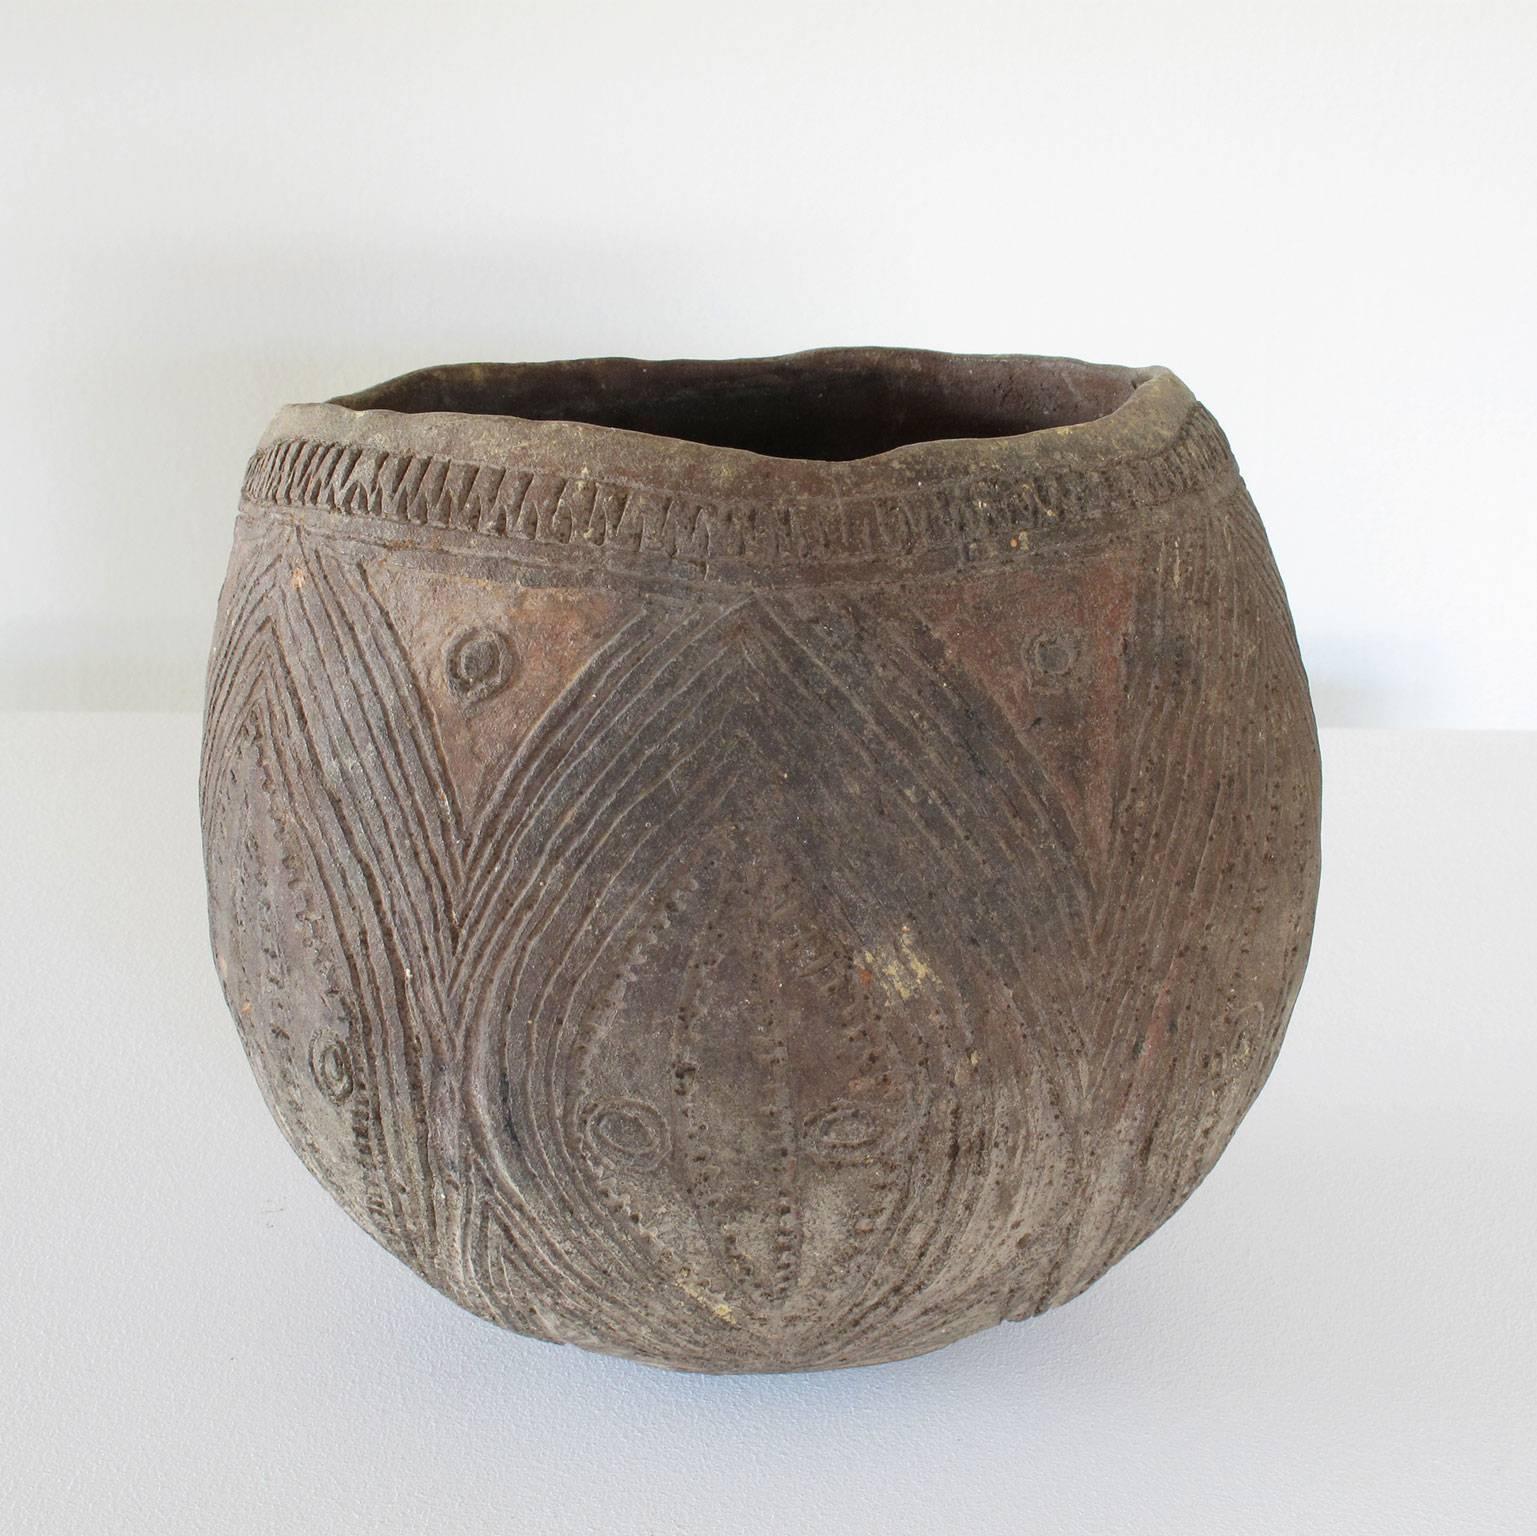 Antique serving vessel, handmade and decorated to be used for yam cult activities, feasts and social ceremonies. Made from 